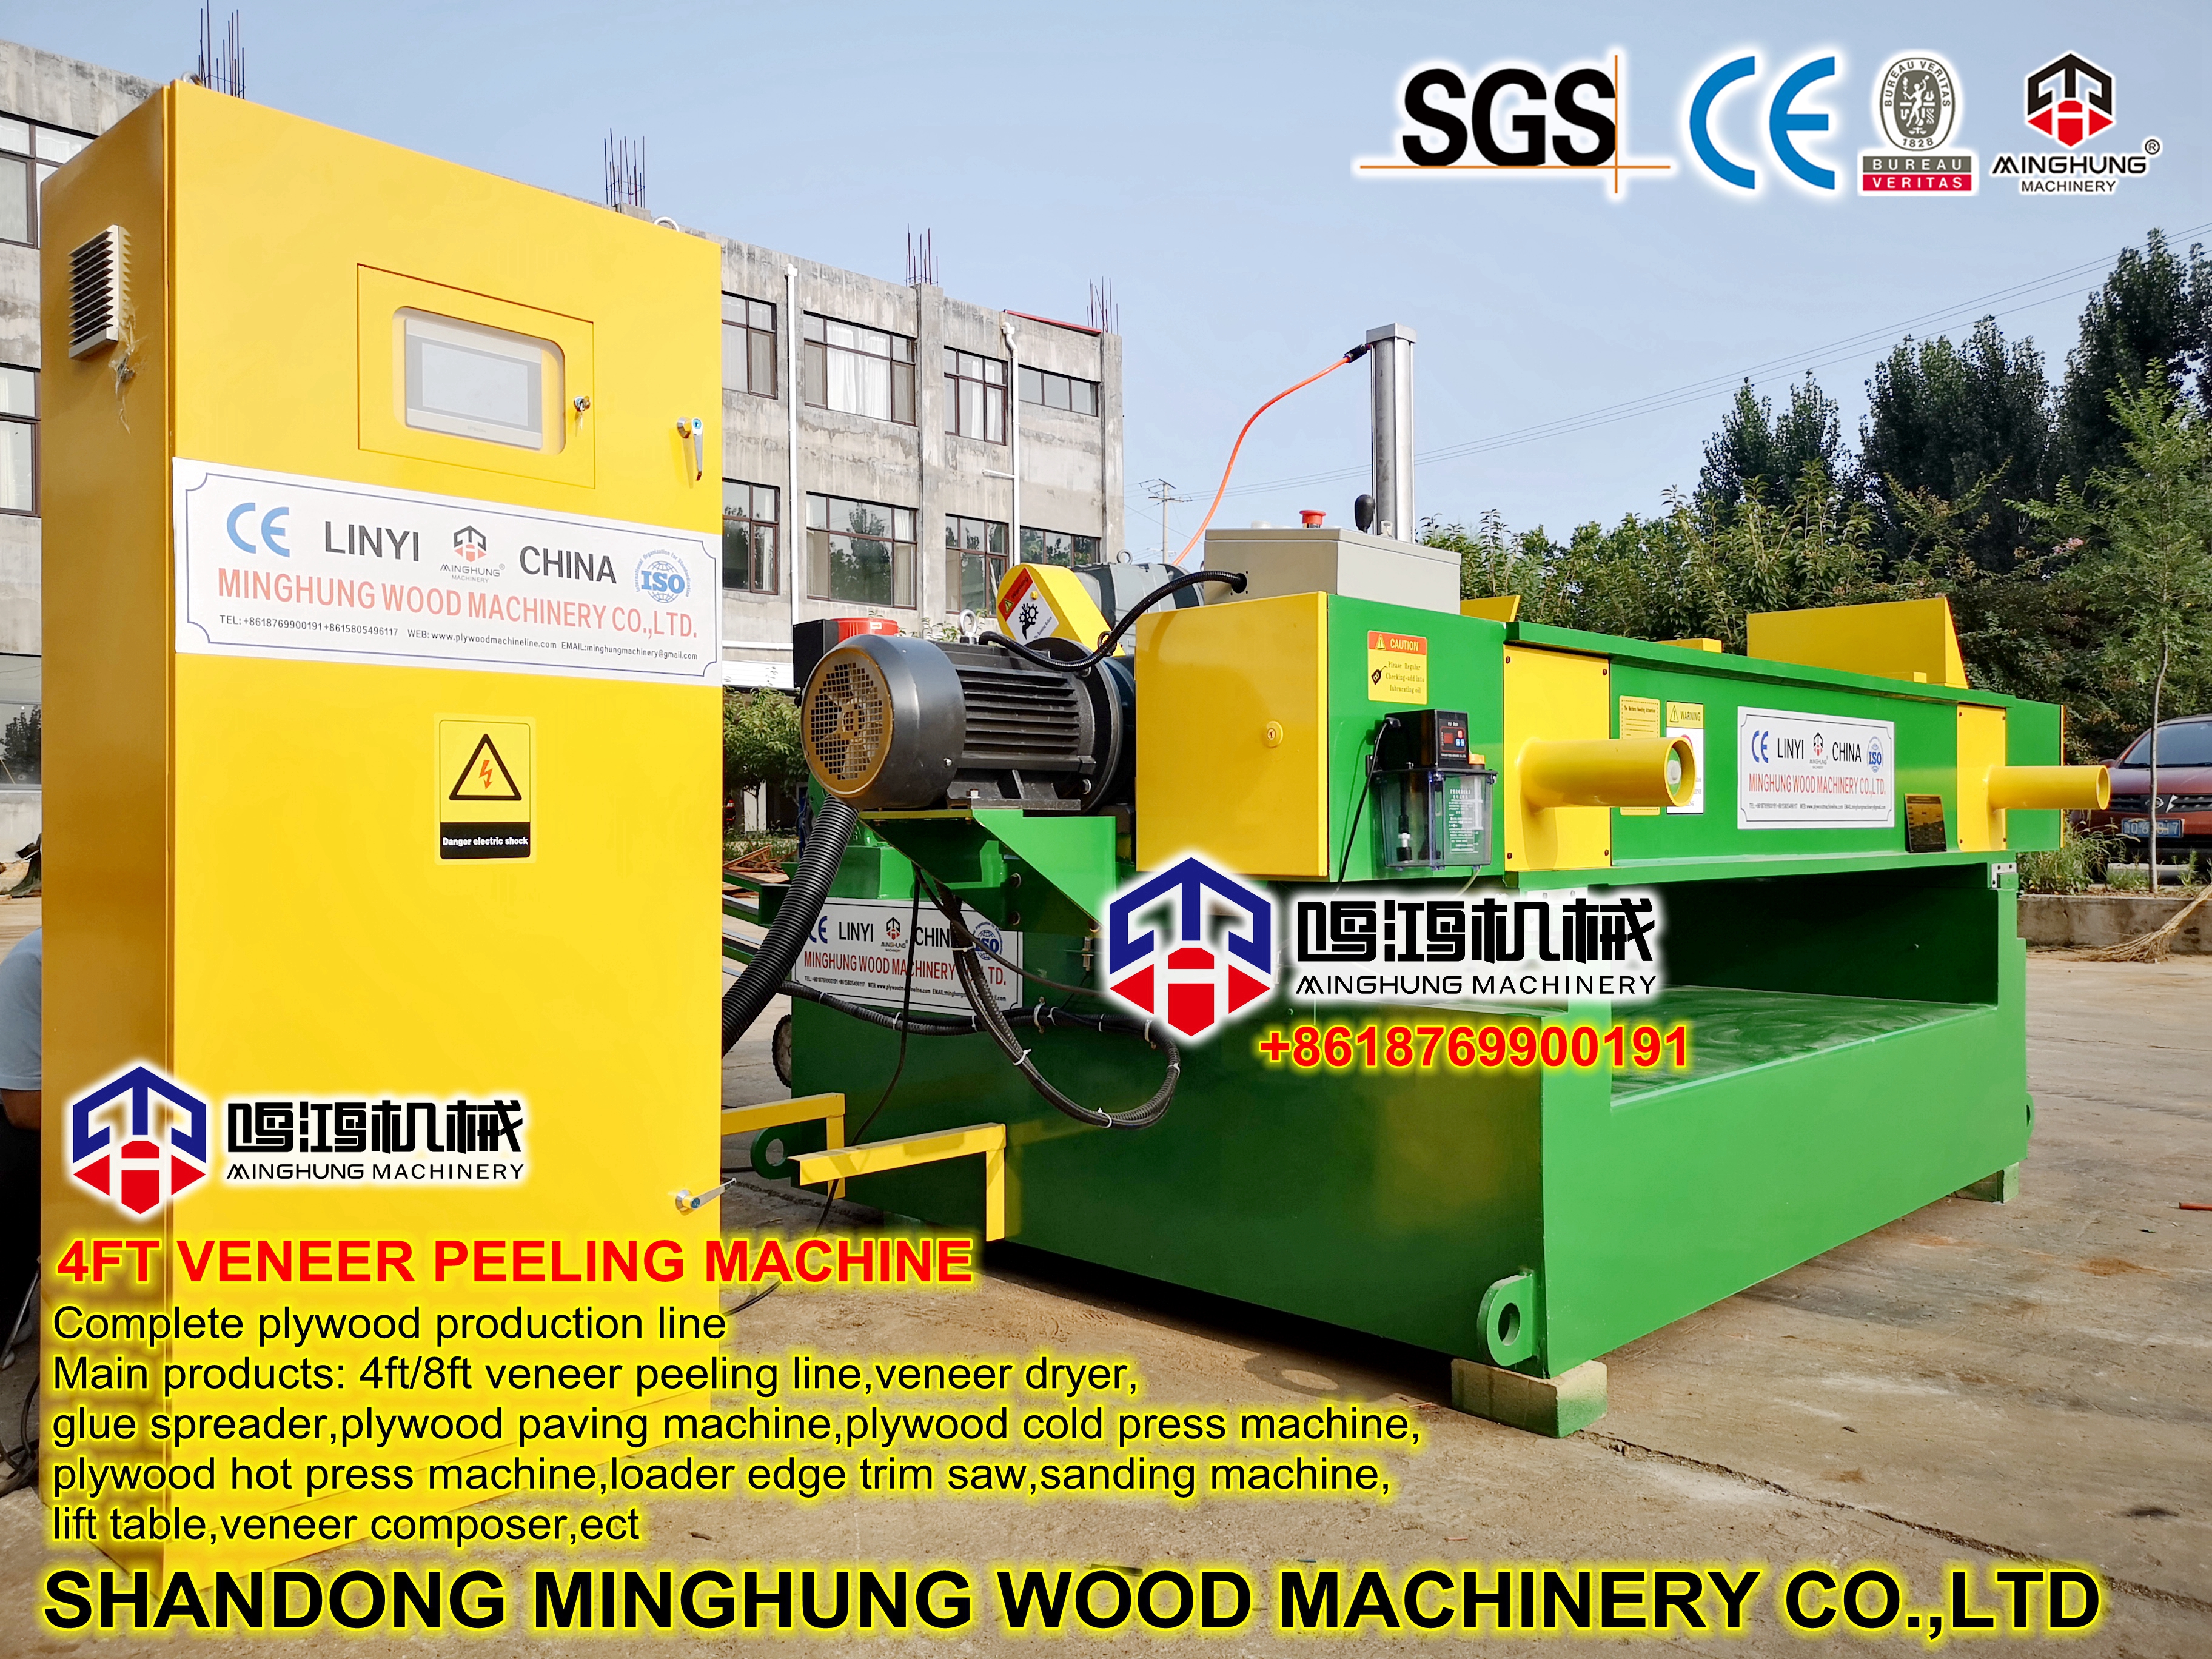 MINGHUNG Spindle wood rotary lathe